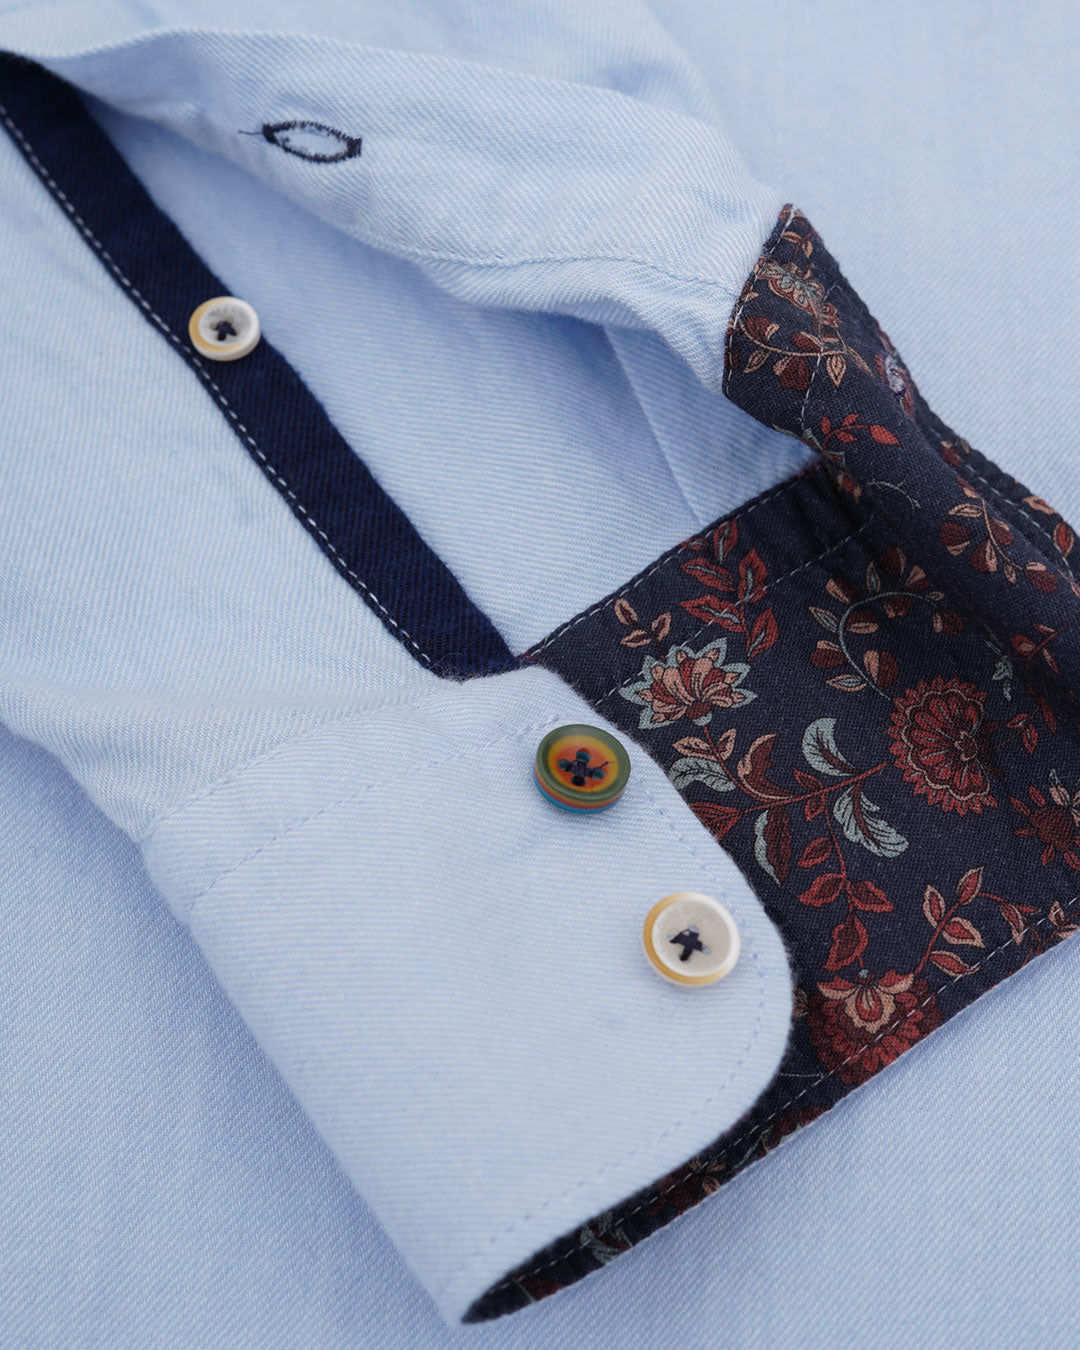 Shirt-Brushed Twill in Sky Hemden Colours and Sons   